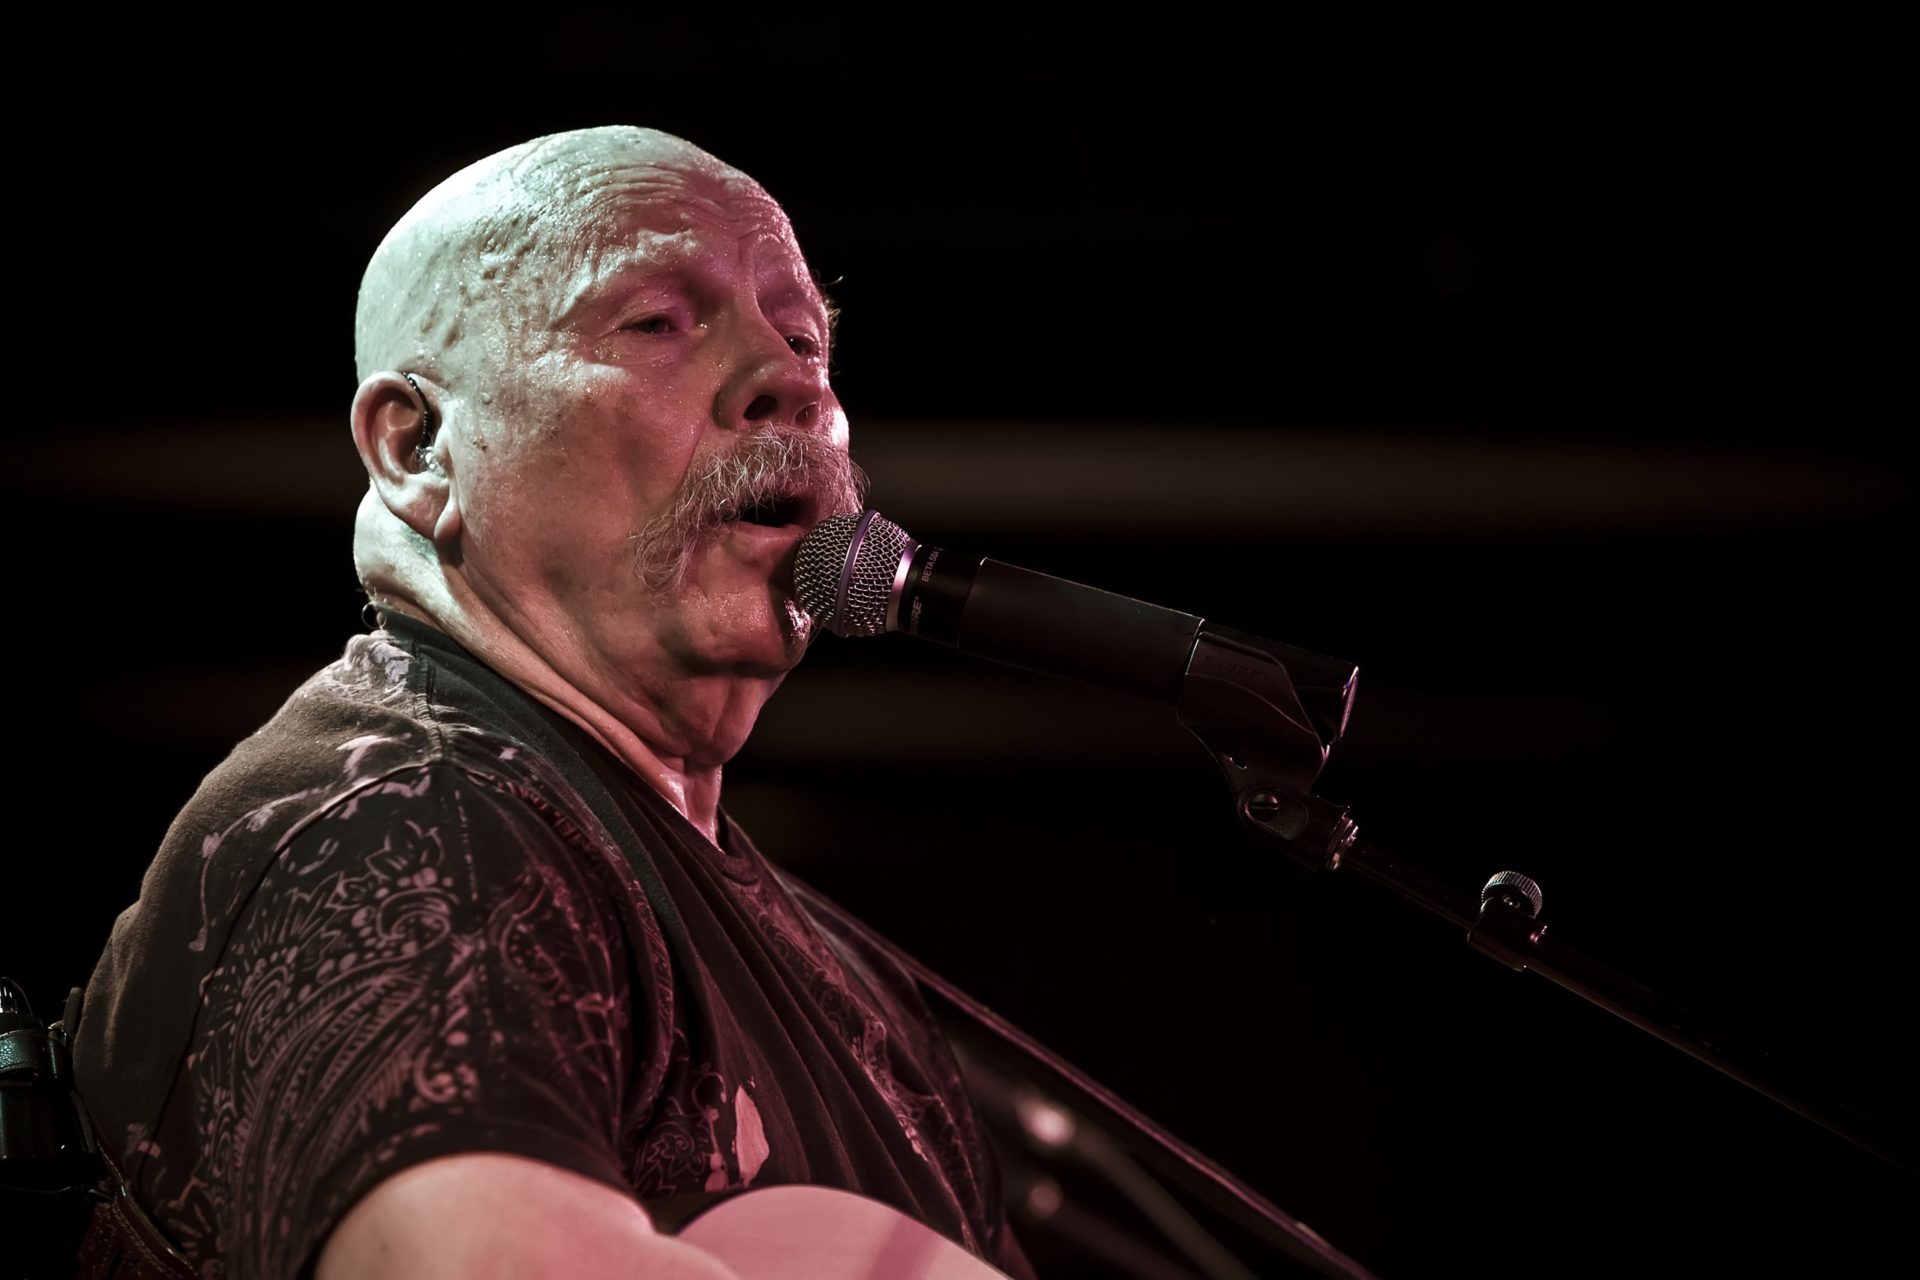 Barry McGuire @ The Gov, March ’09